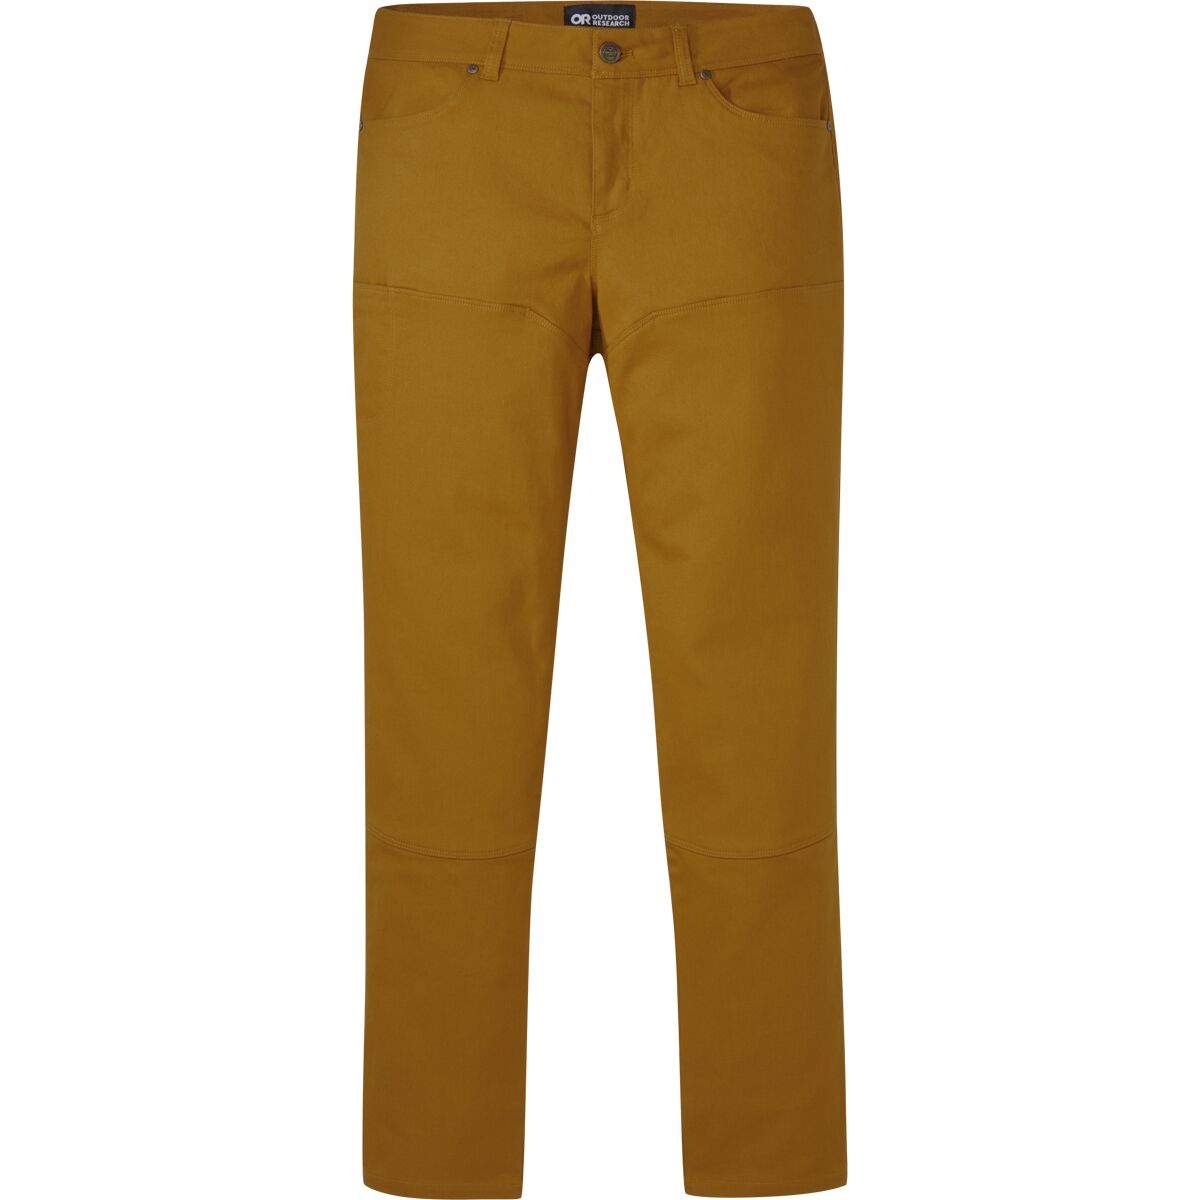 Outdoor Research Lined Work Pant - Women's